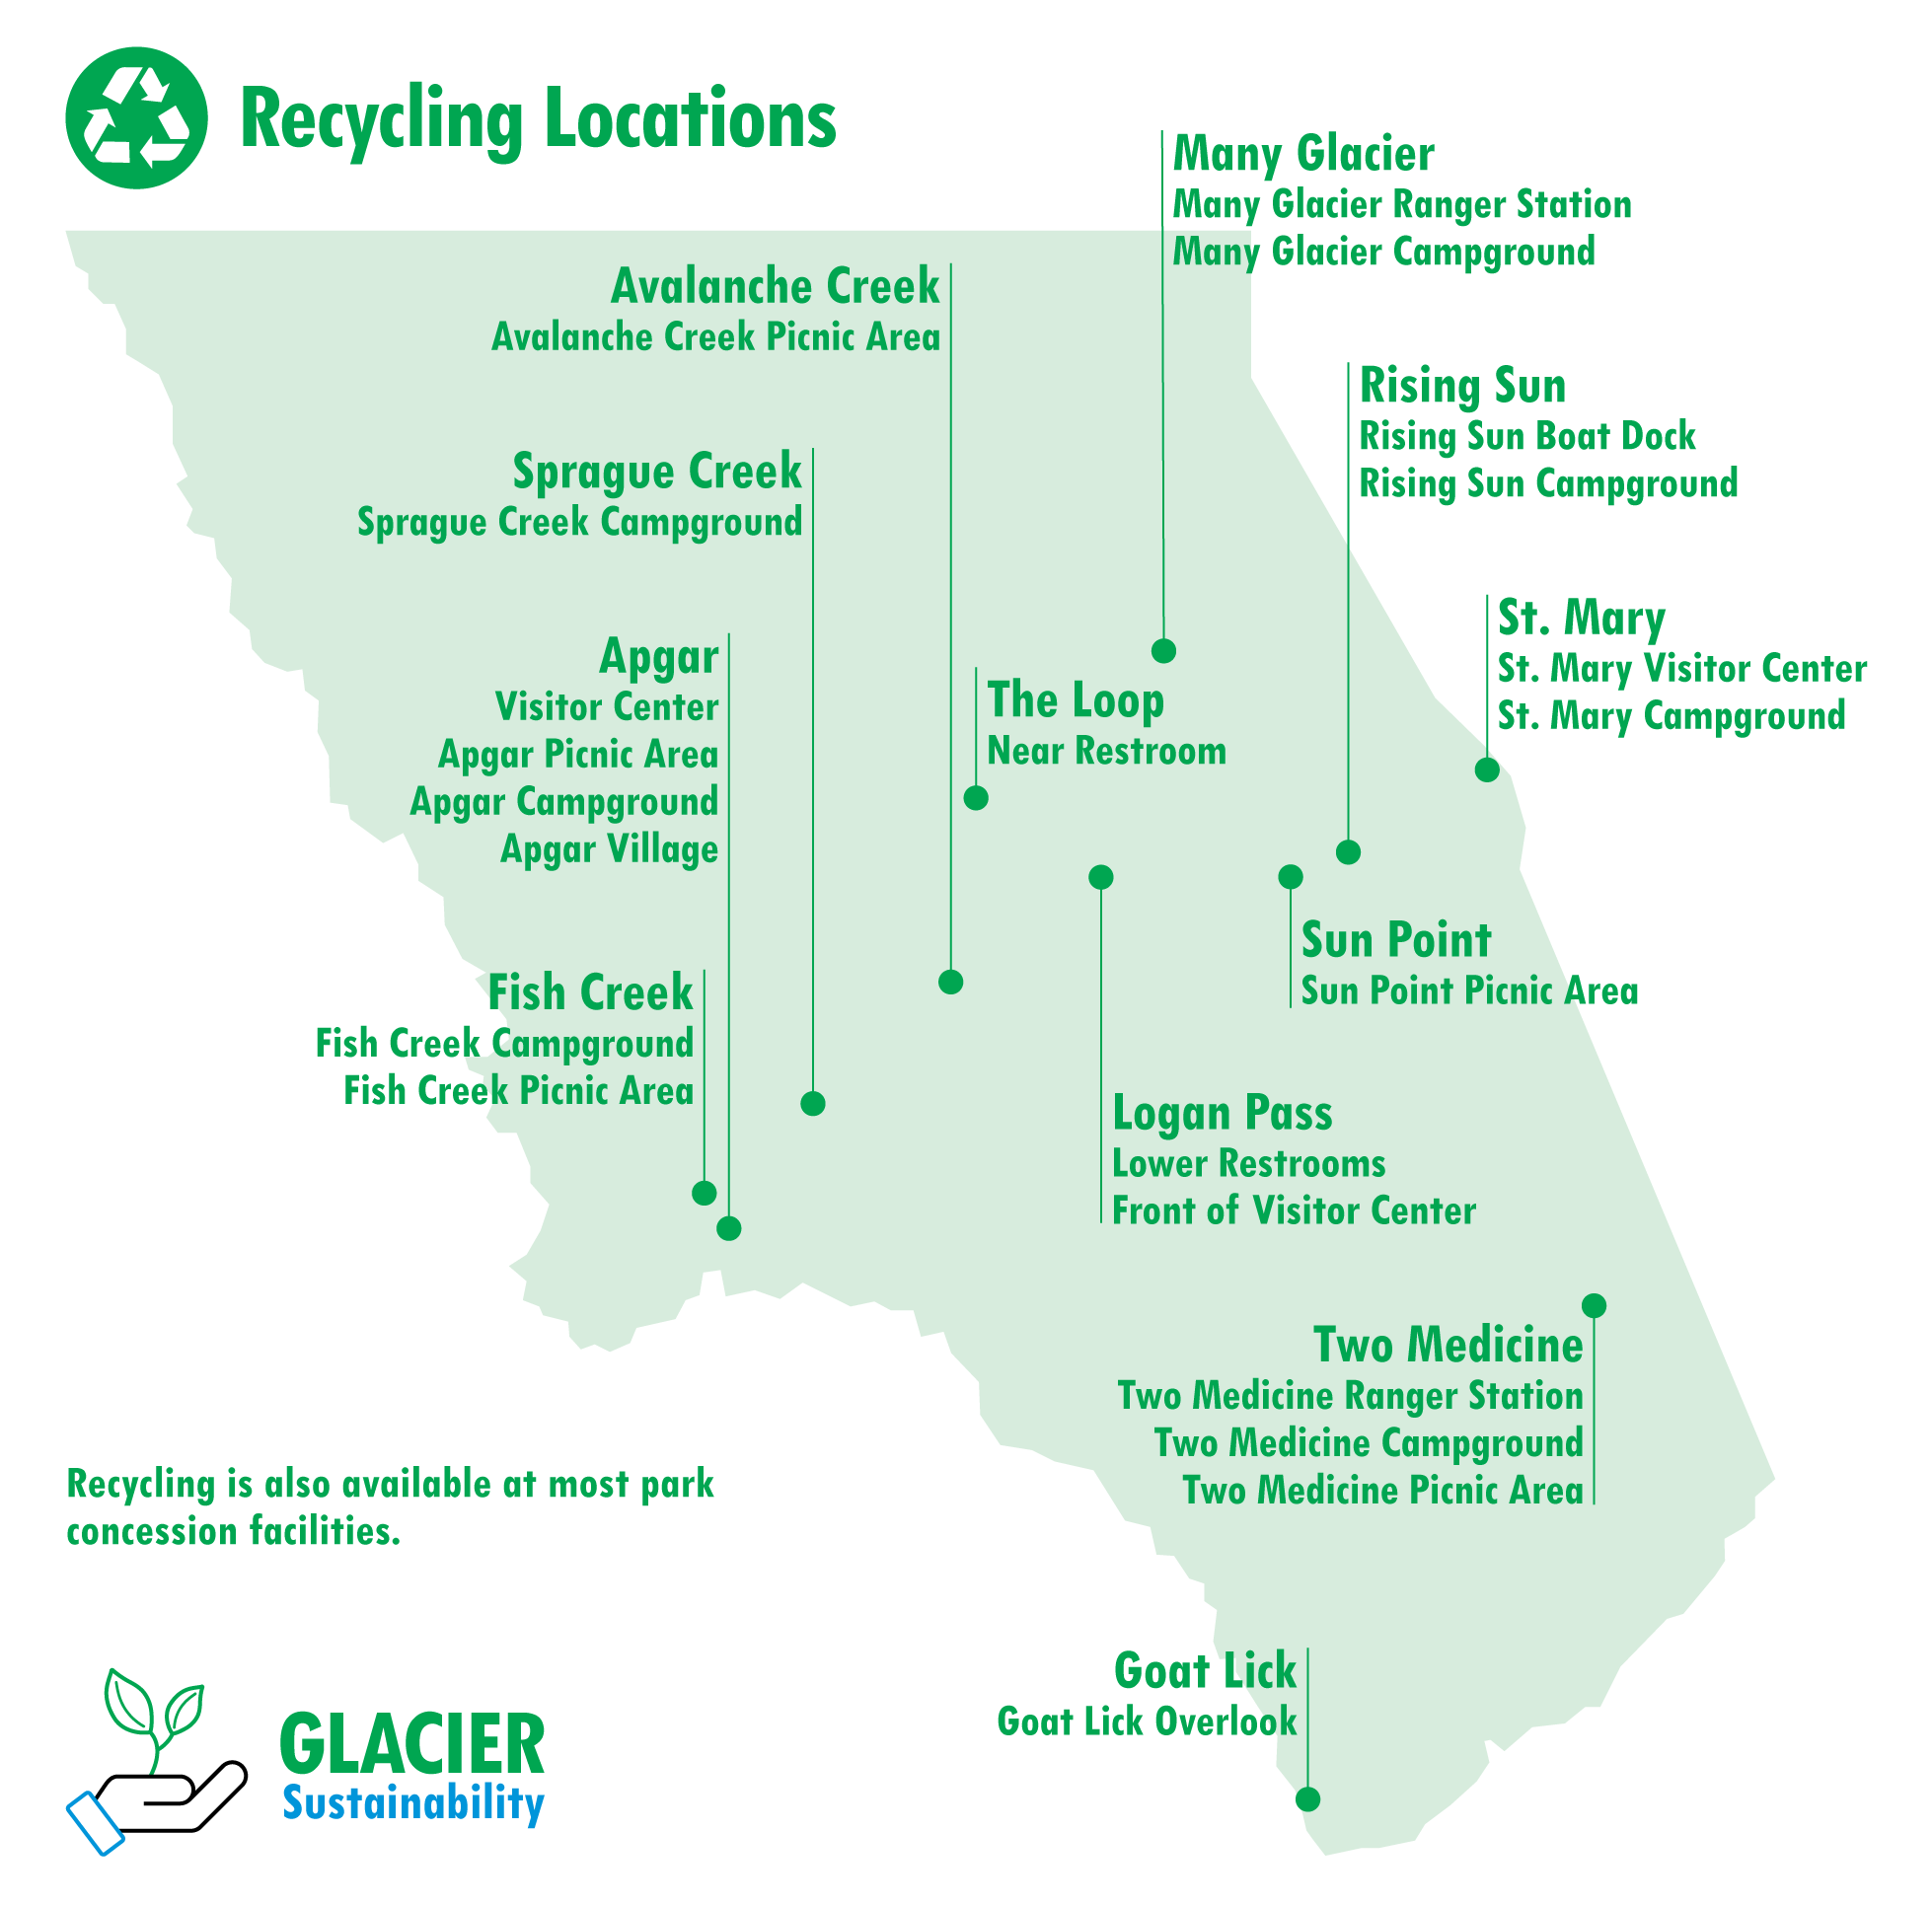 map of the locations in the park with recycling capabilities